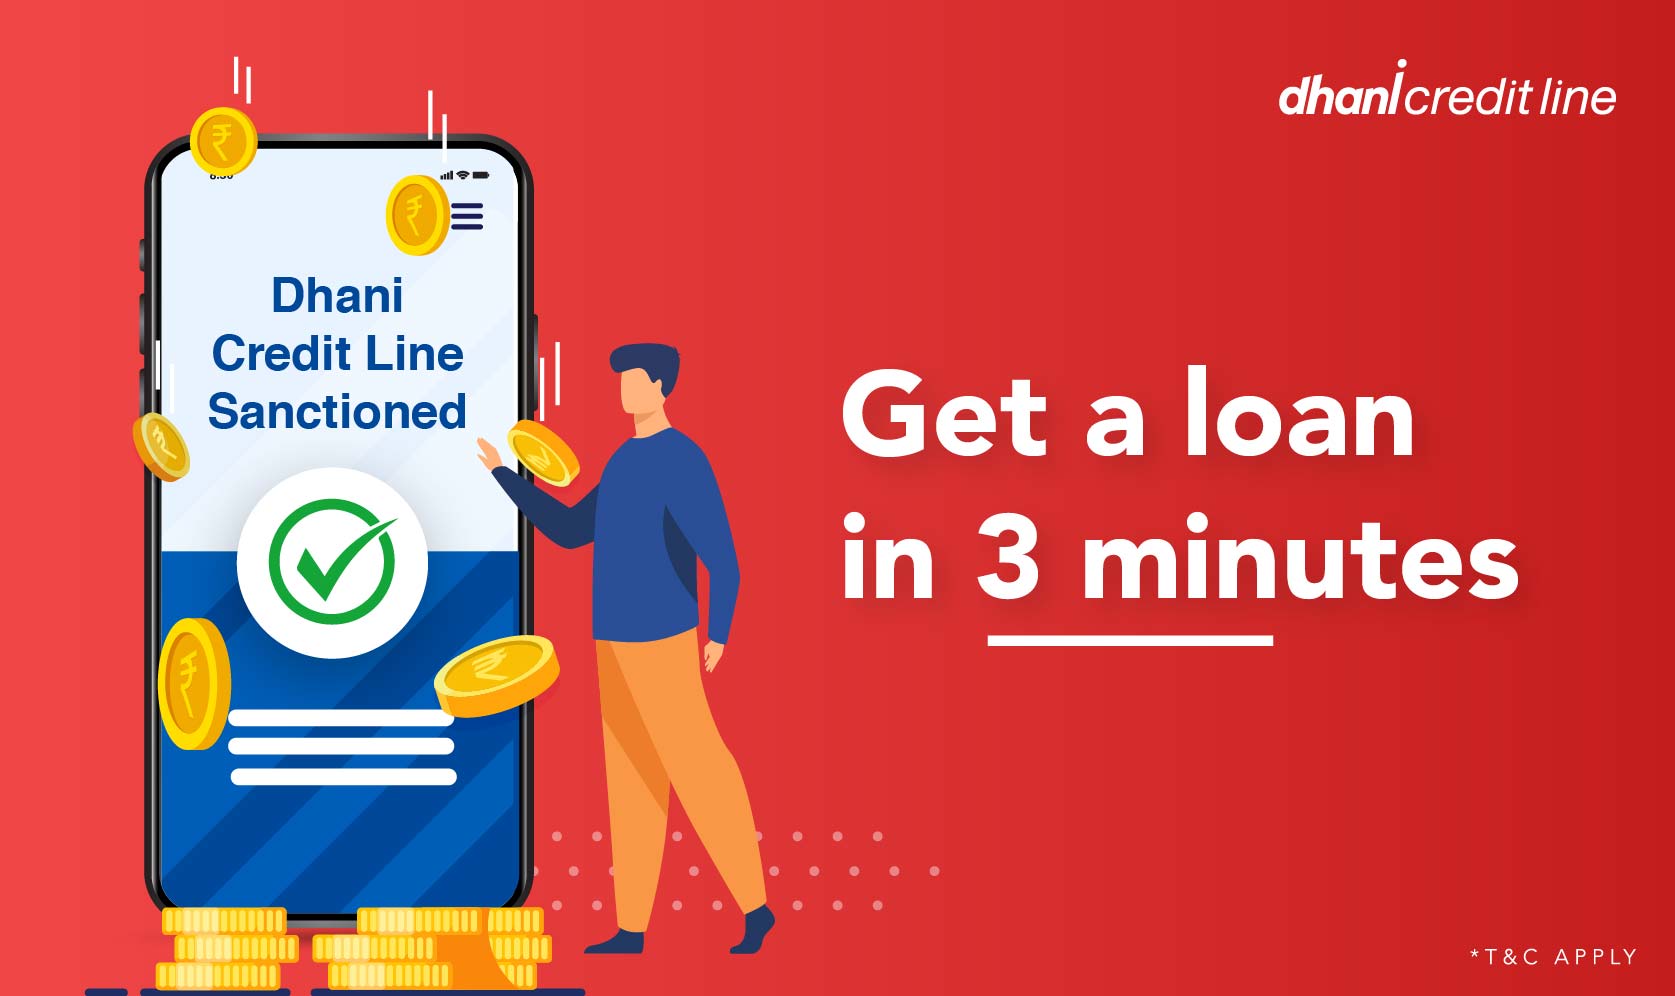 How To Use Dhani Credit Line?